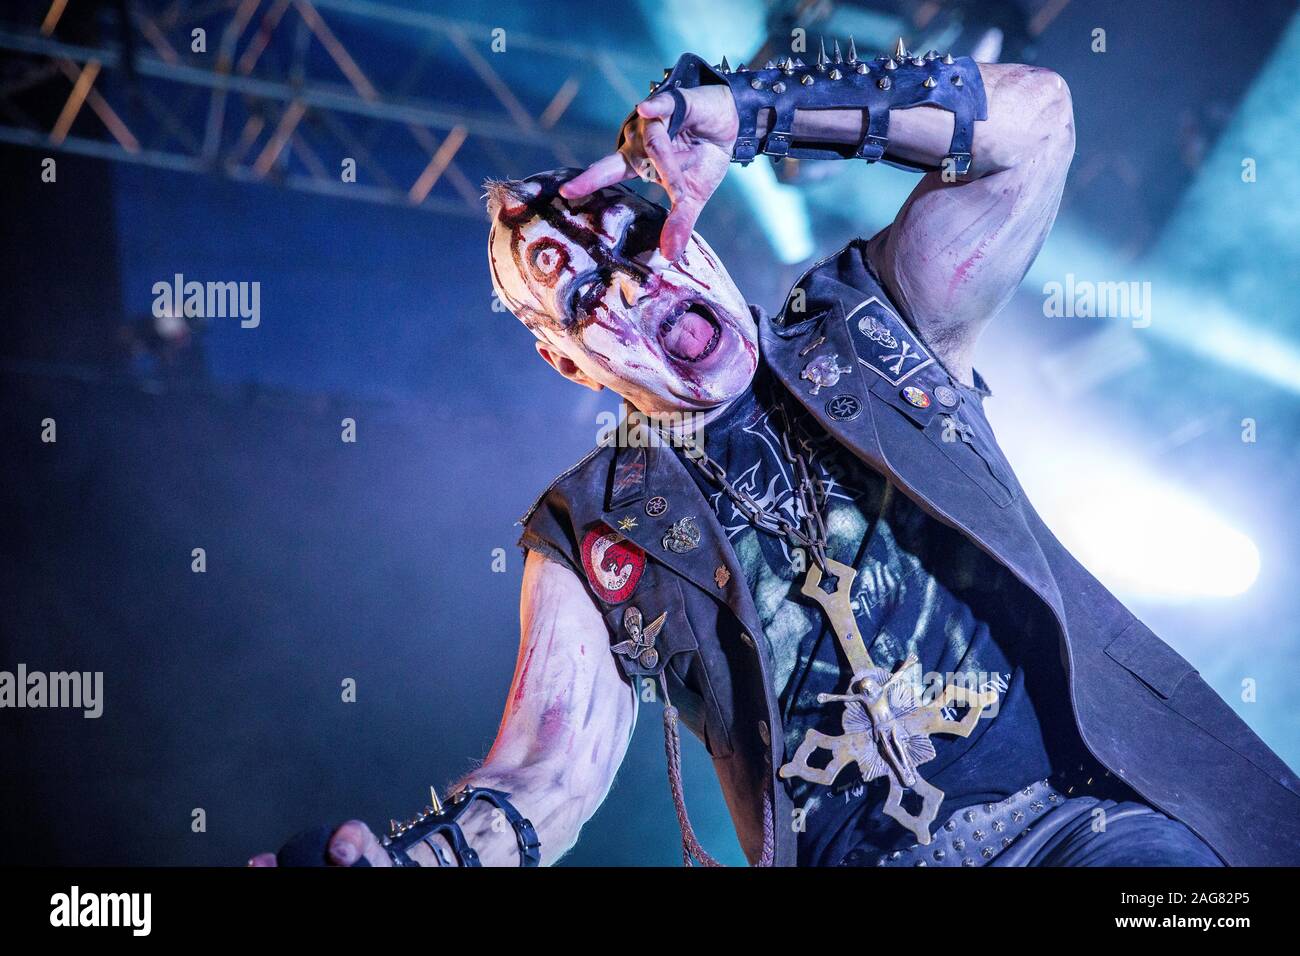 Oslo, Norway. 28th, June 2019. The Norwegian black metal band Mayhem performs a live concert during the Norwegian music festival Tons of Rock 2019 in Oslo. Here vocalist Attila Csihar is seen live on stage. (Photo credit: Gonzales Photo - Terje Dokken). Stock Photo